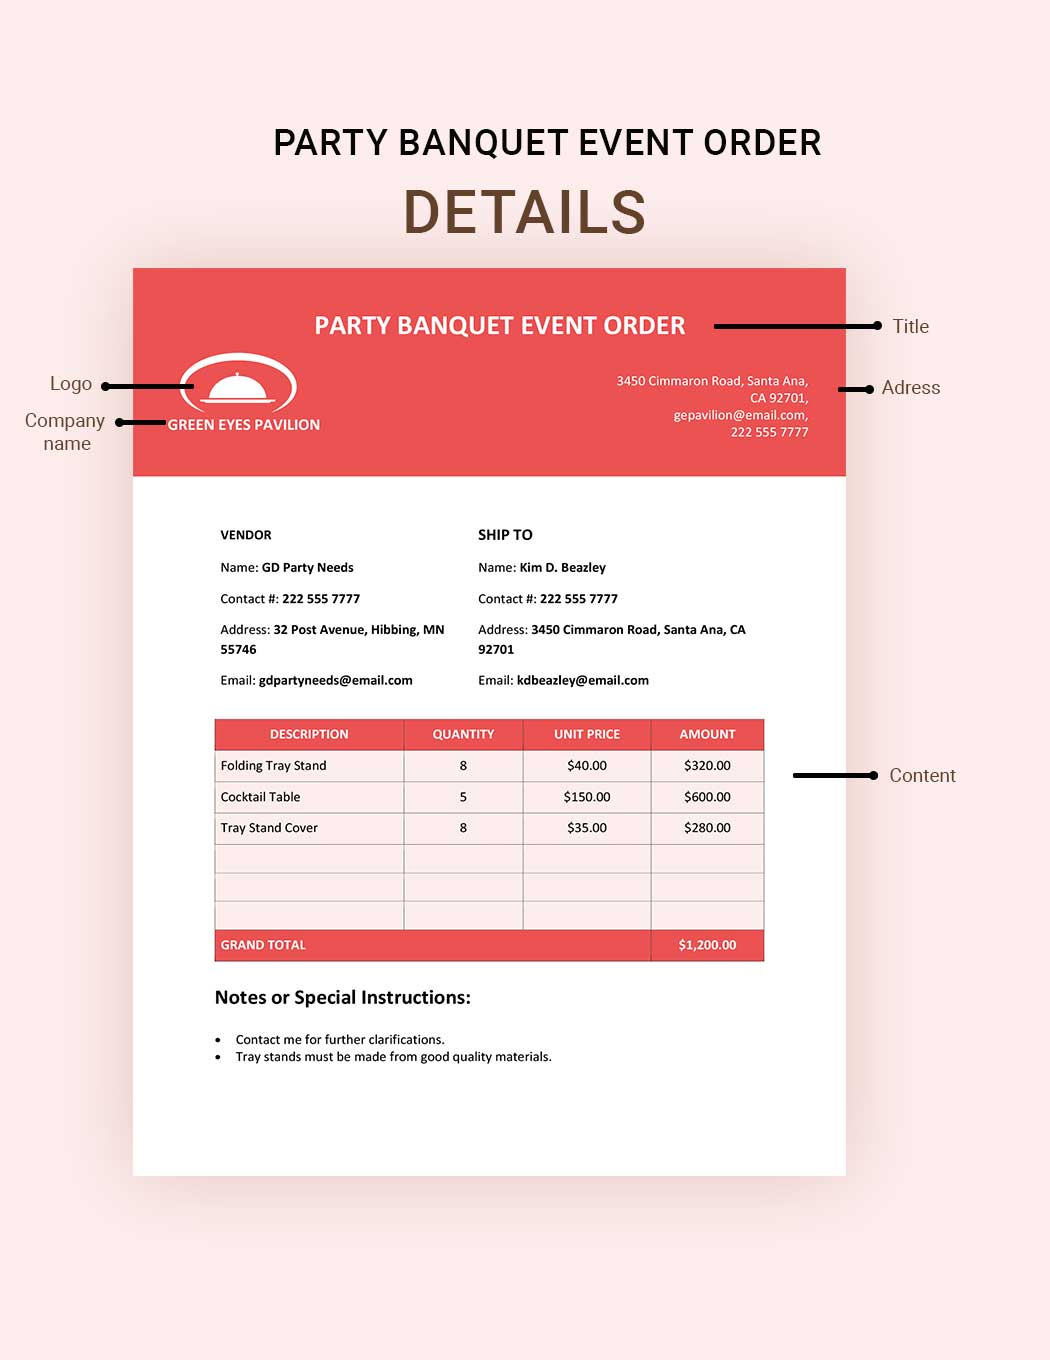 Party Banquet Event Order Template Download in Word, Google Docs